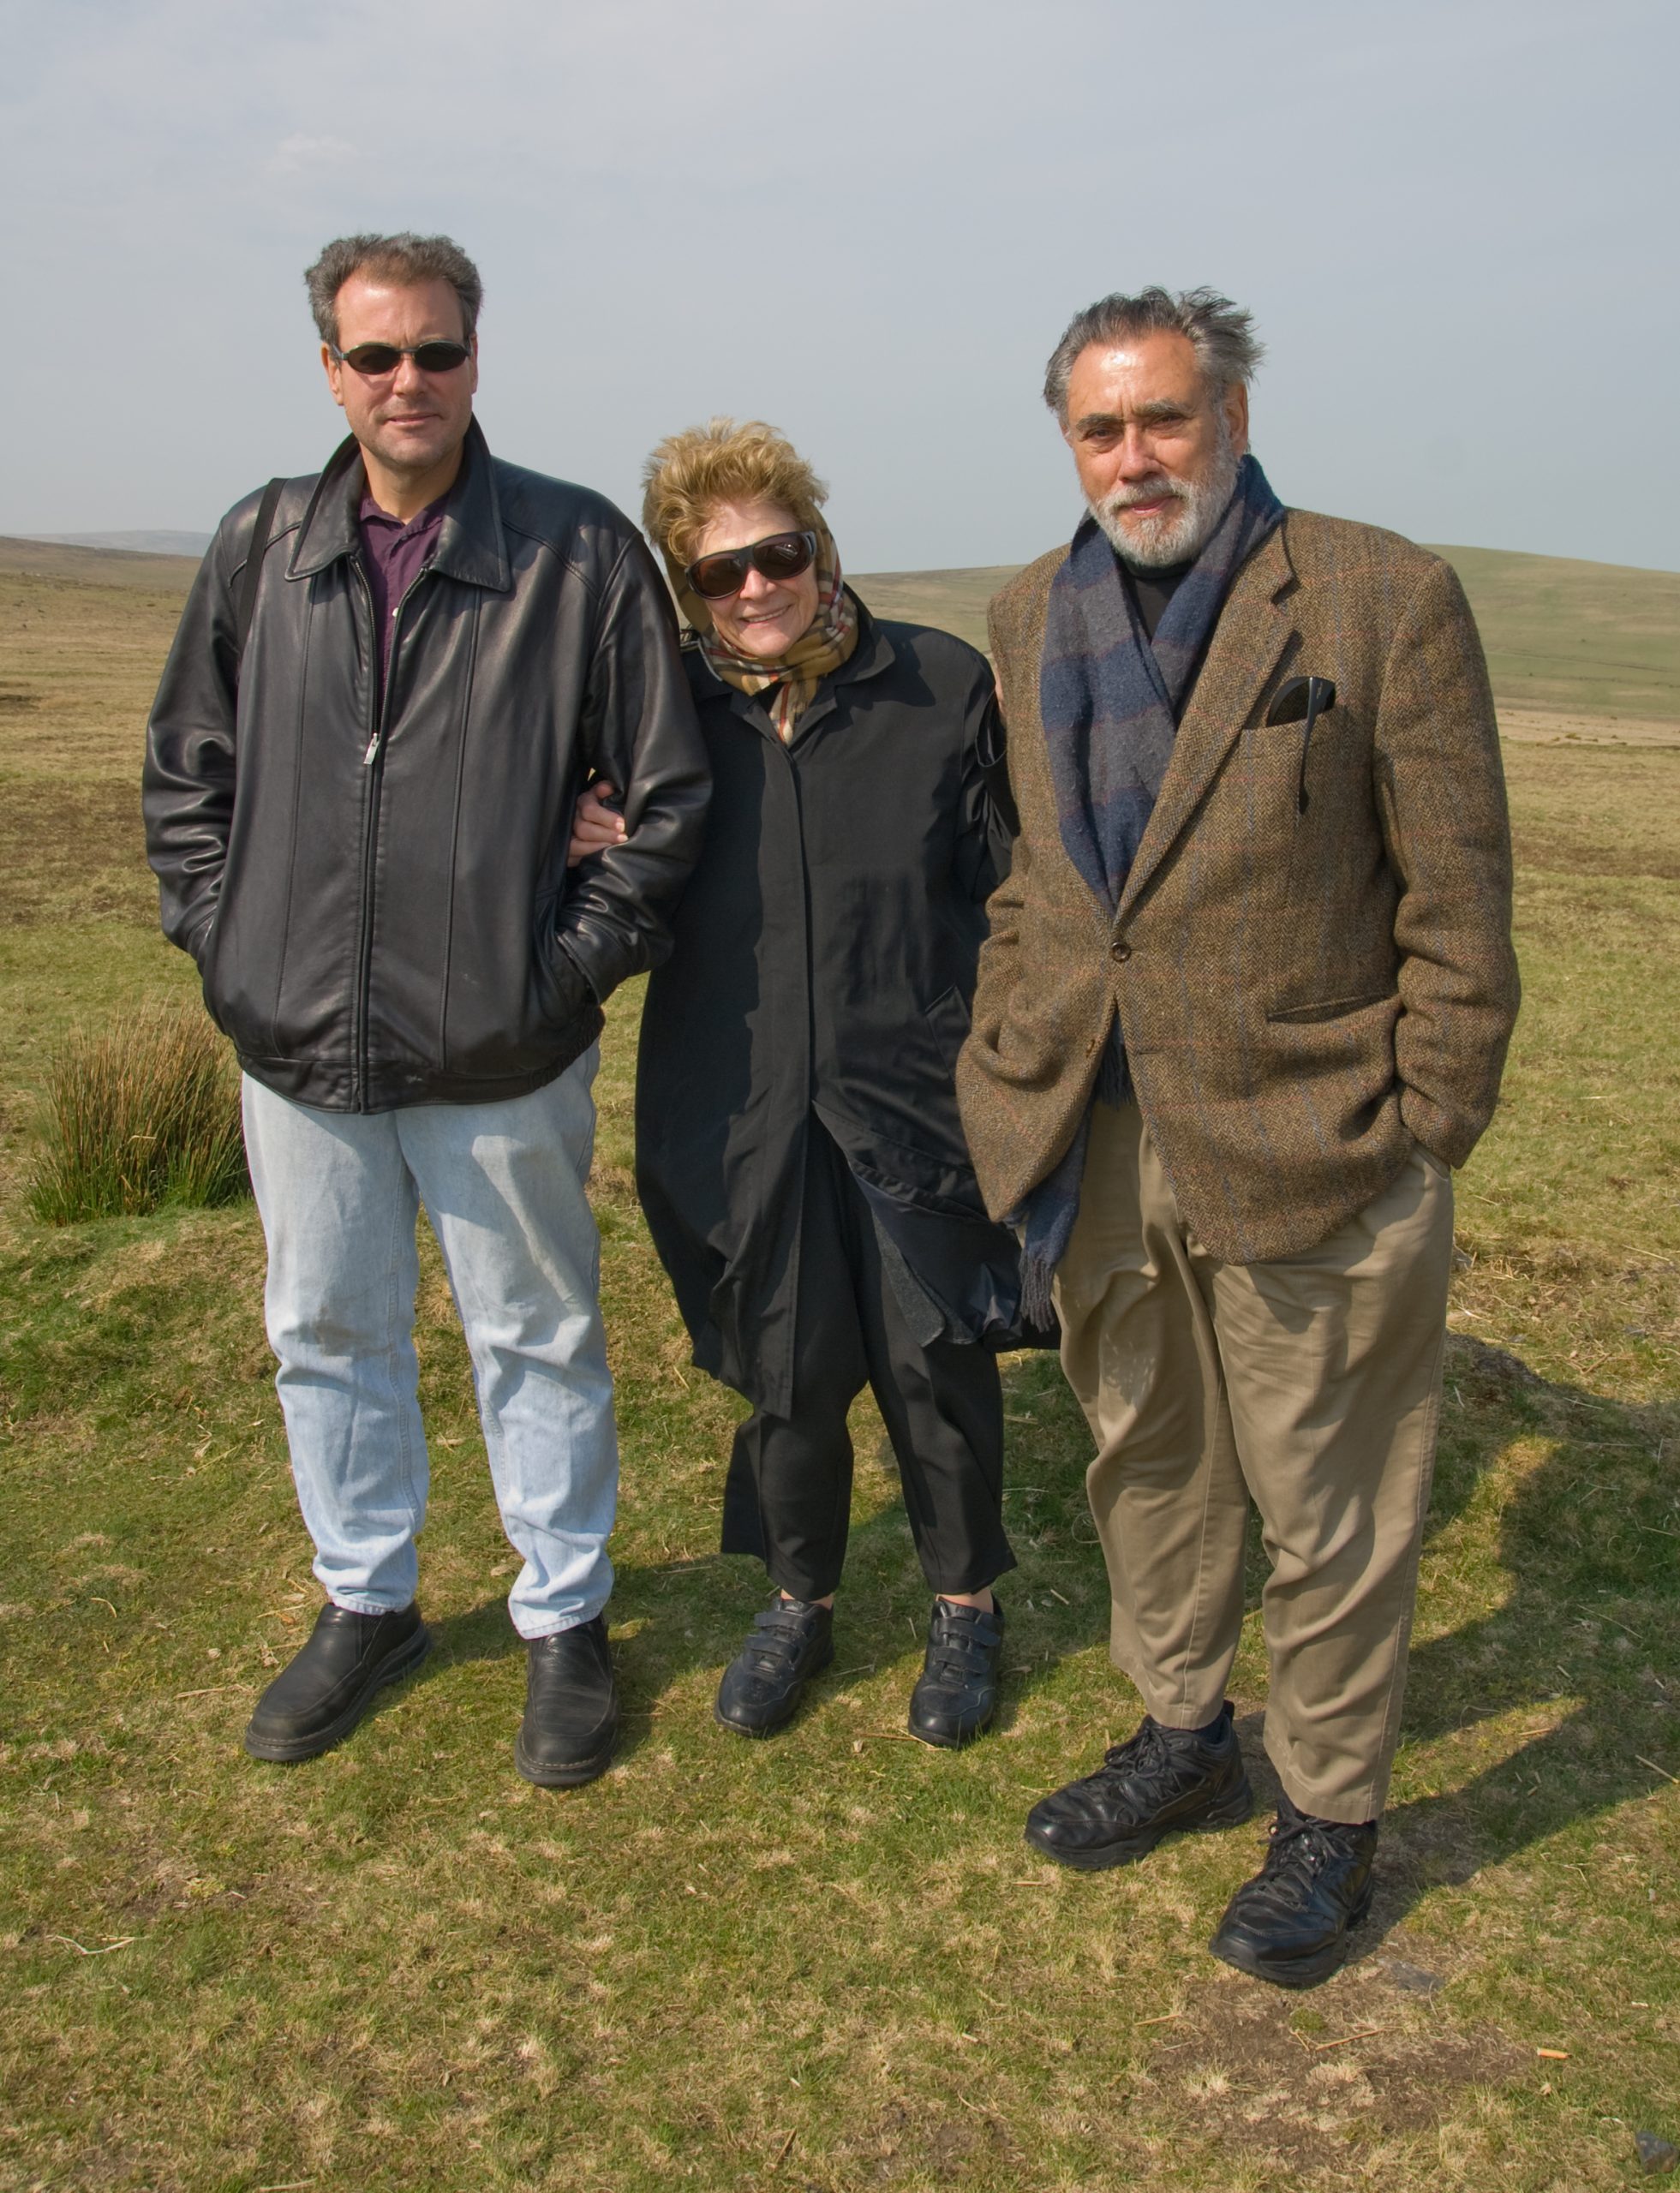 A picture of three people standing together in a field smiling